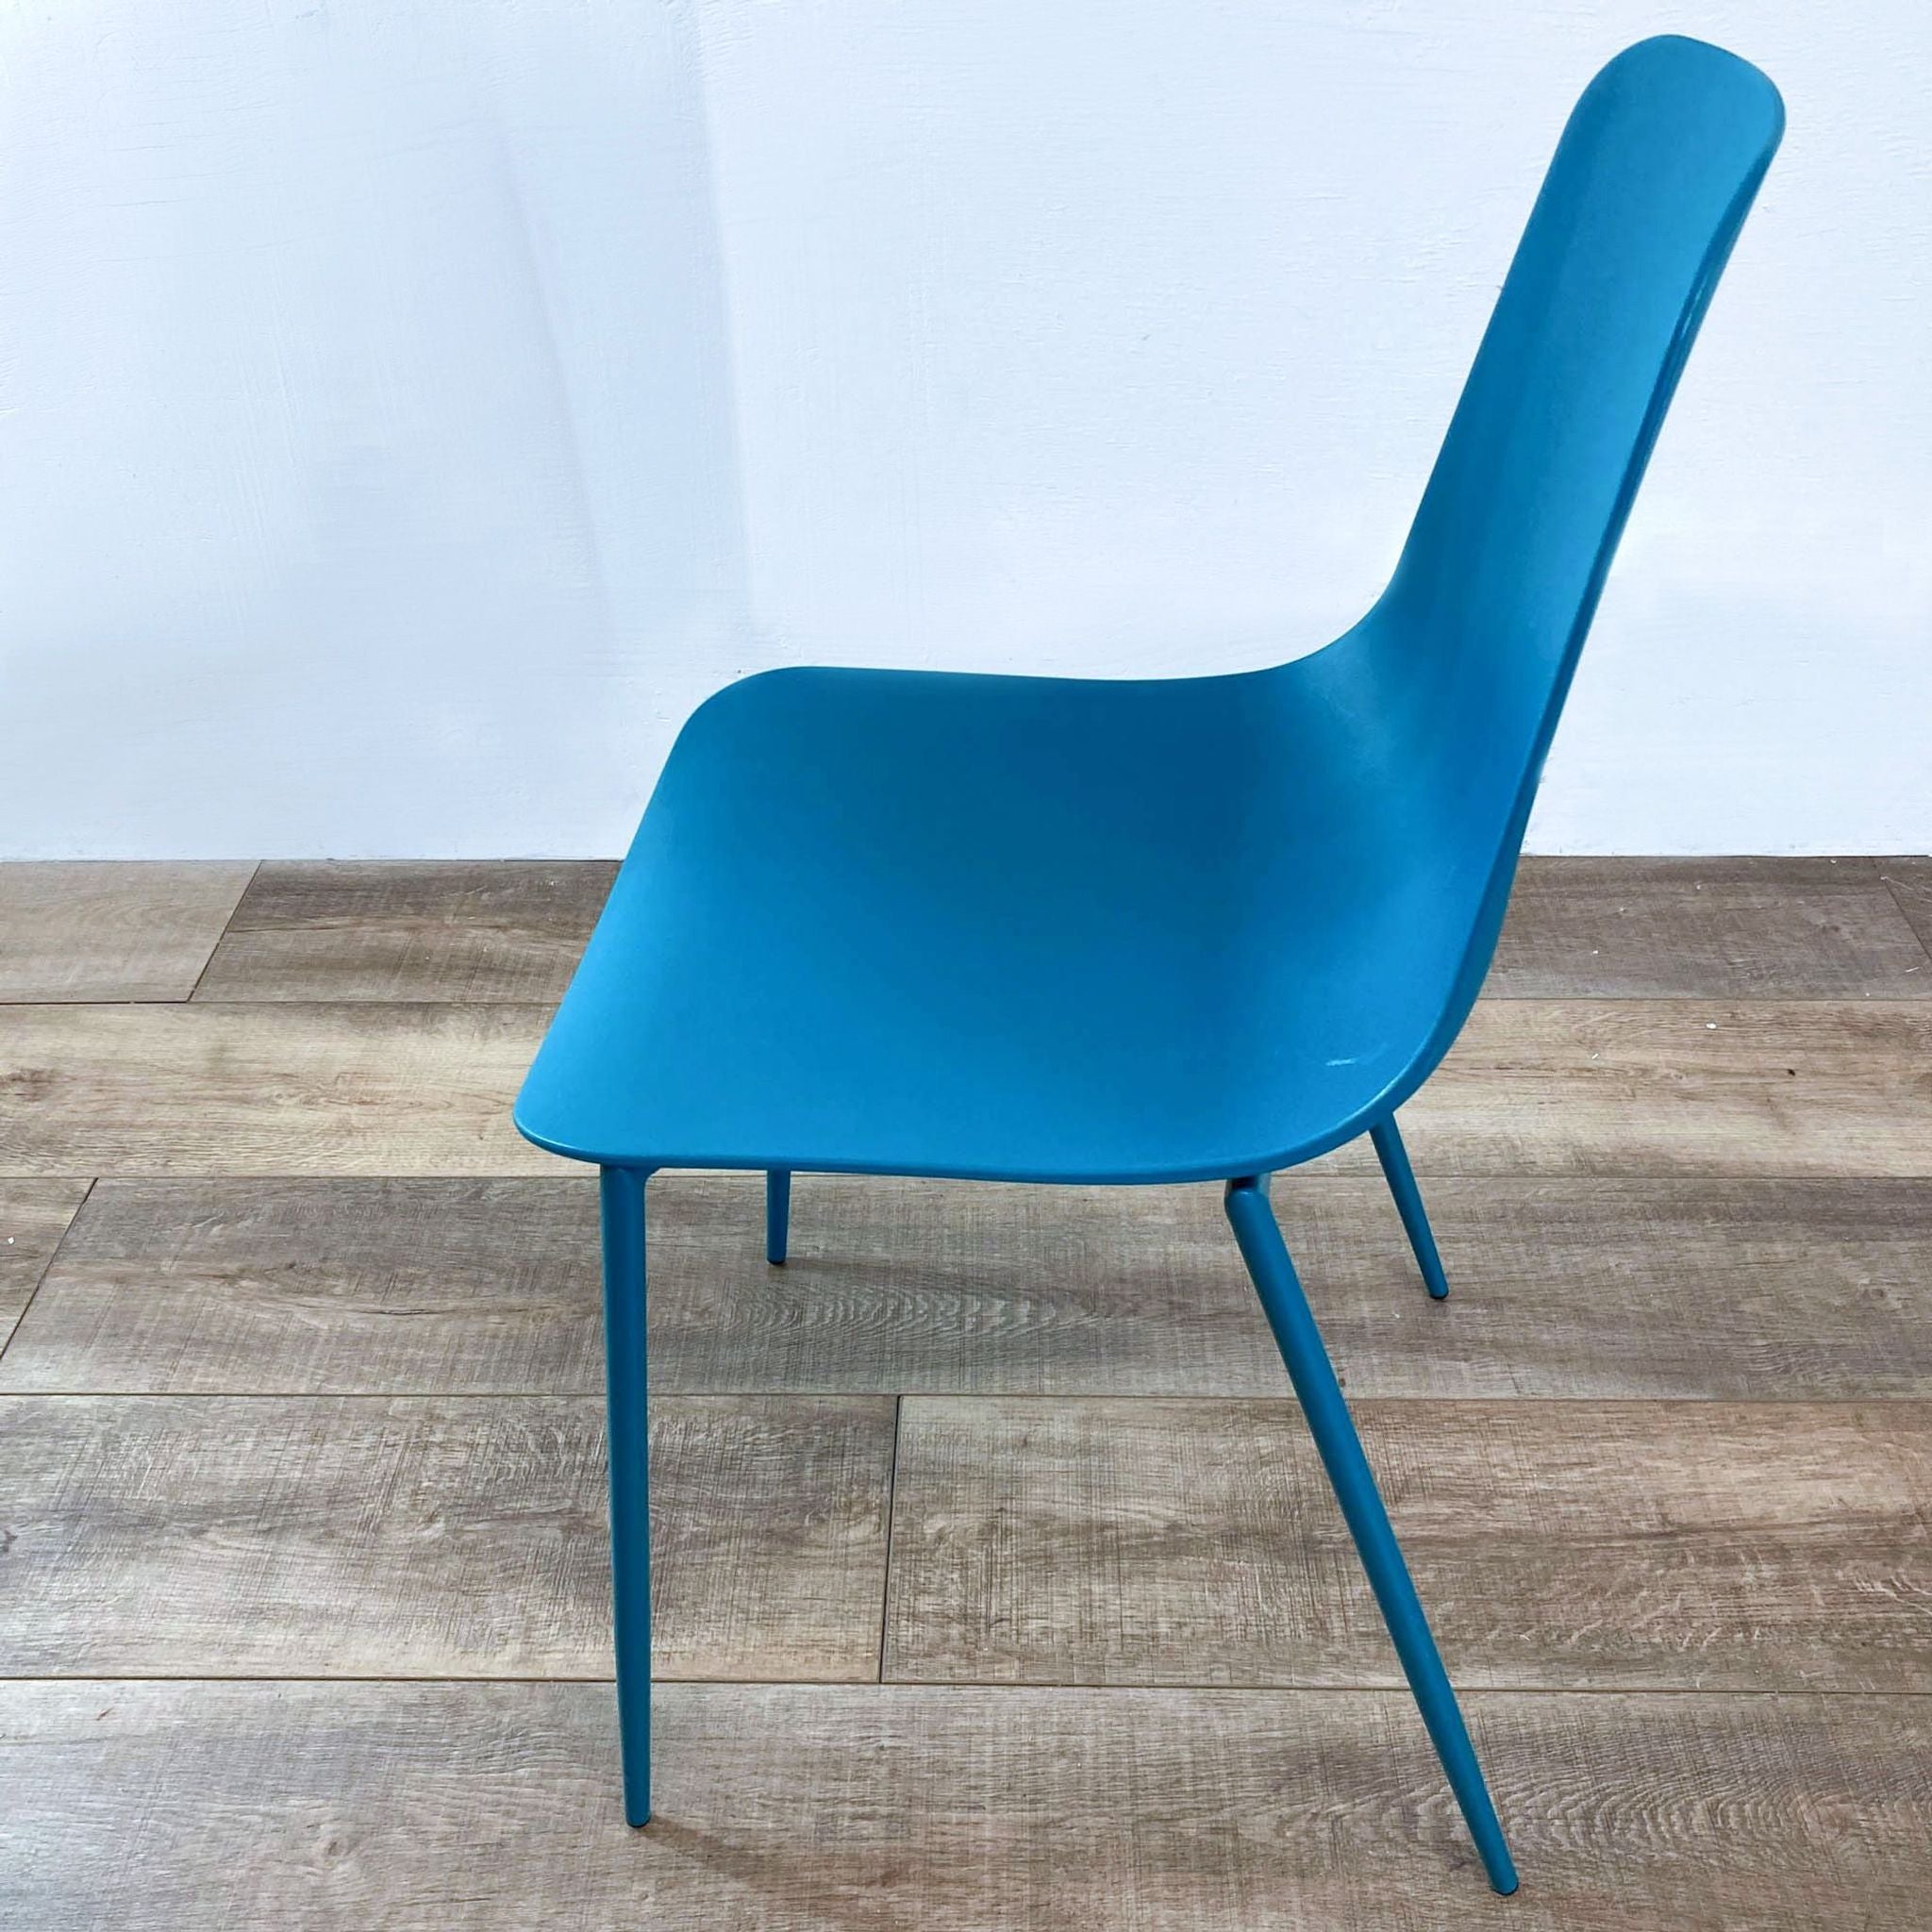 Side view of a Reperch modern teal plastic molded chair with durable metal legs on wooden flooring.